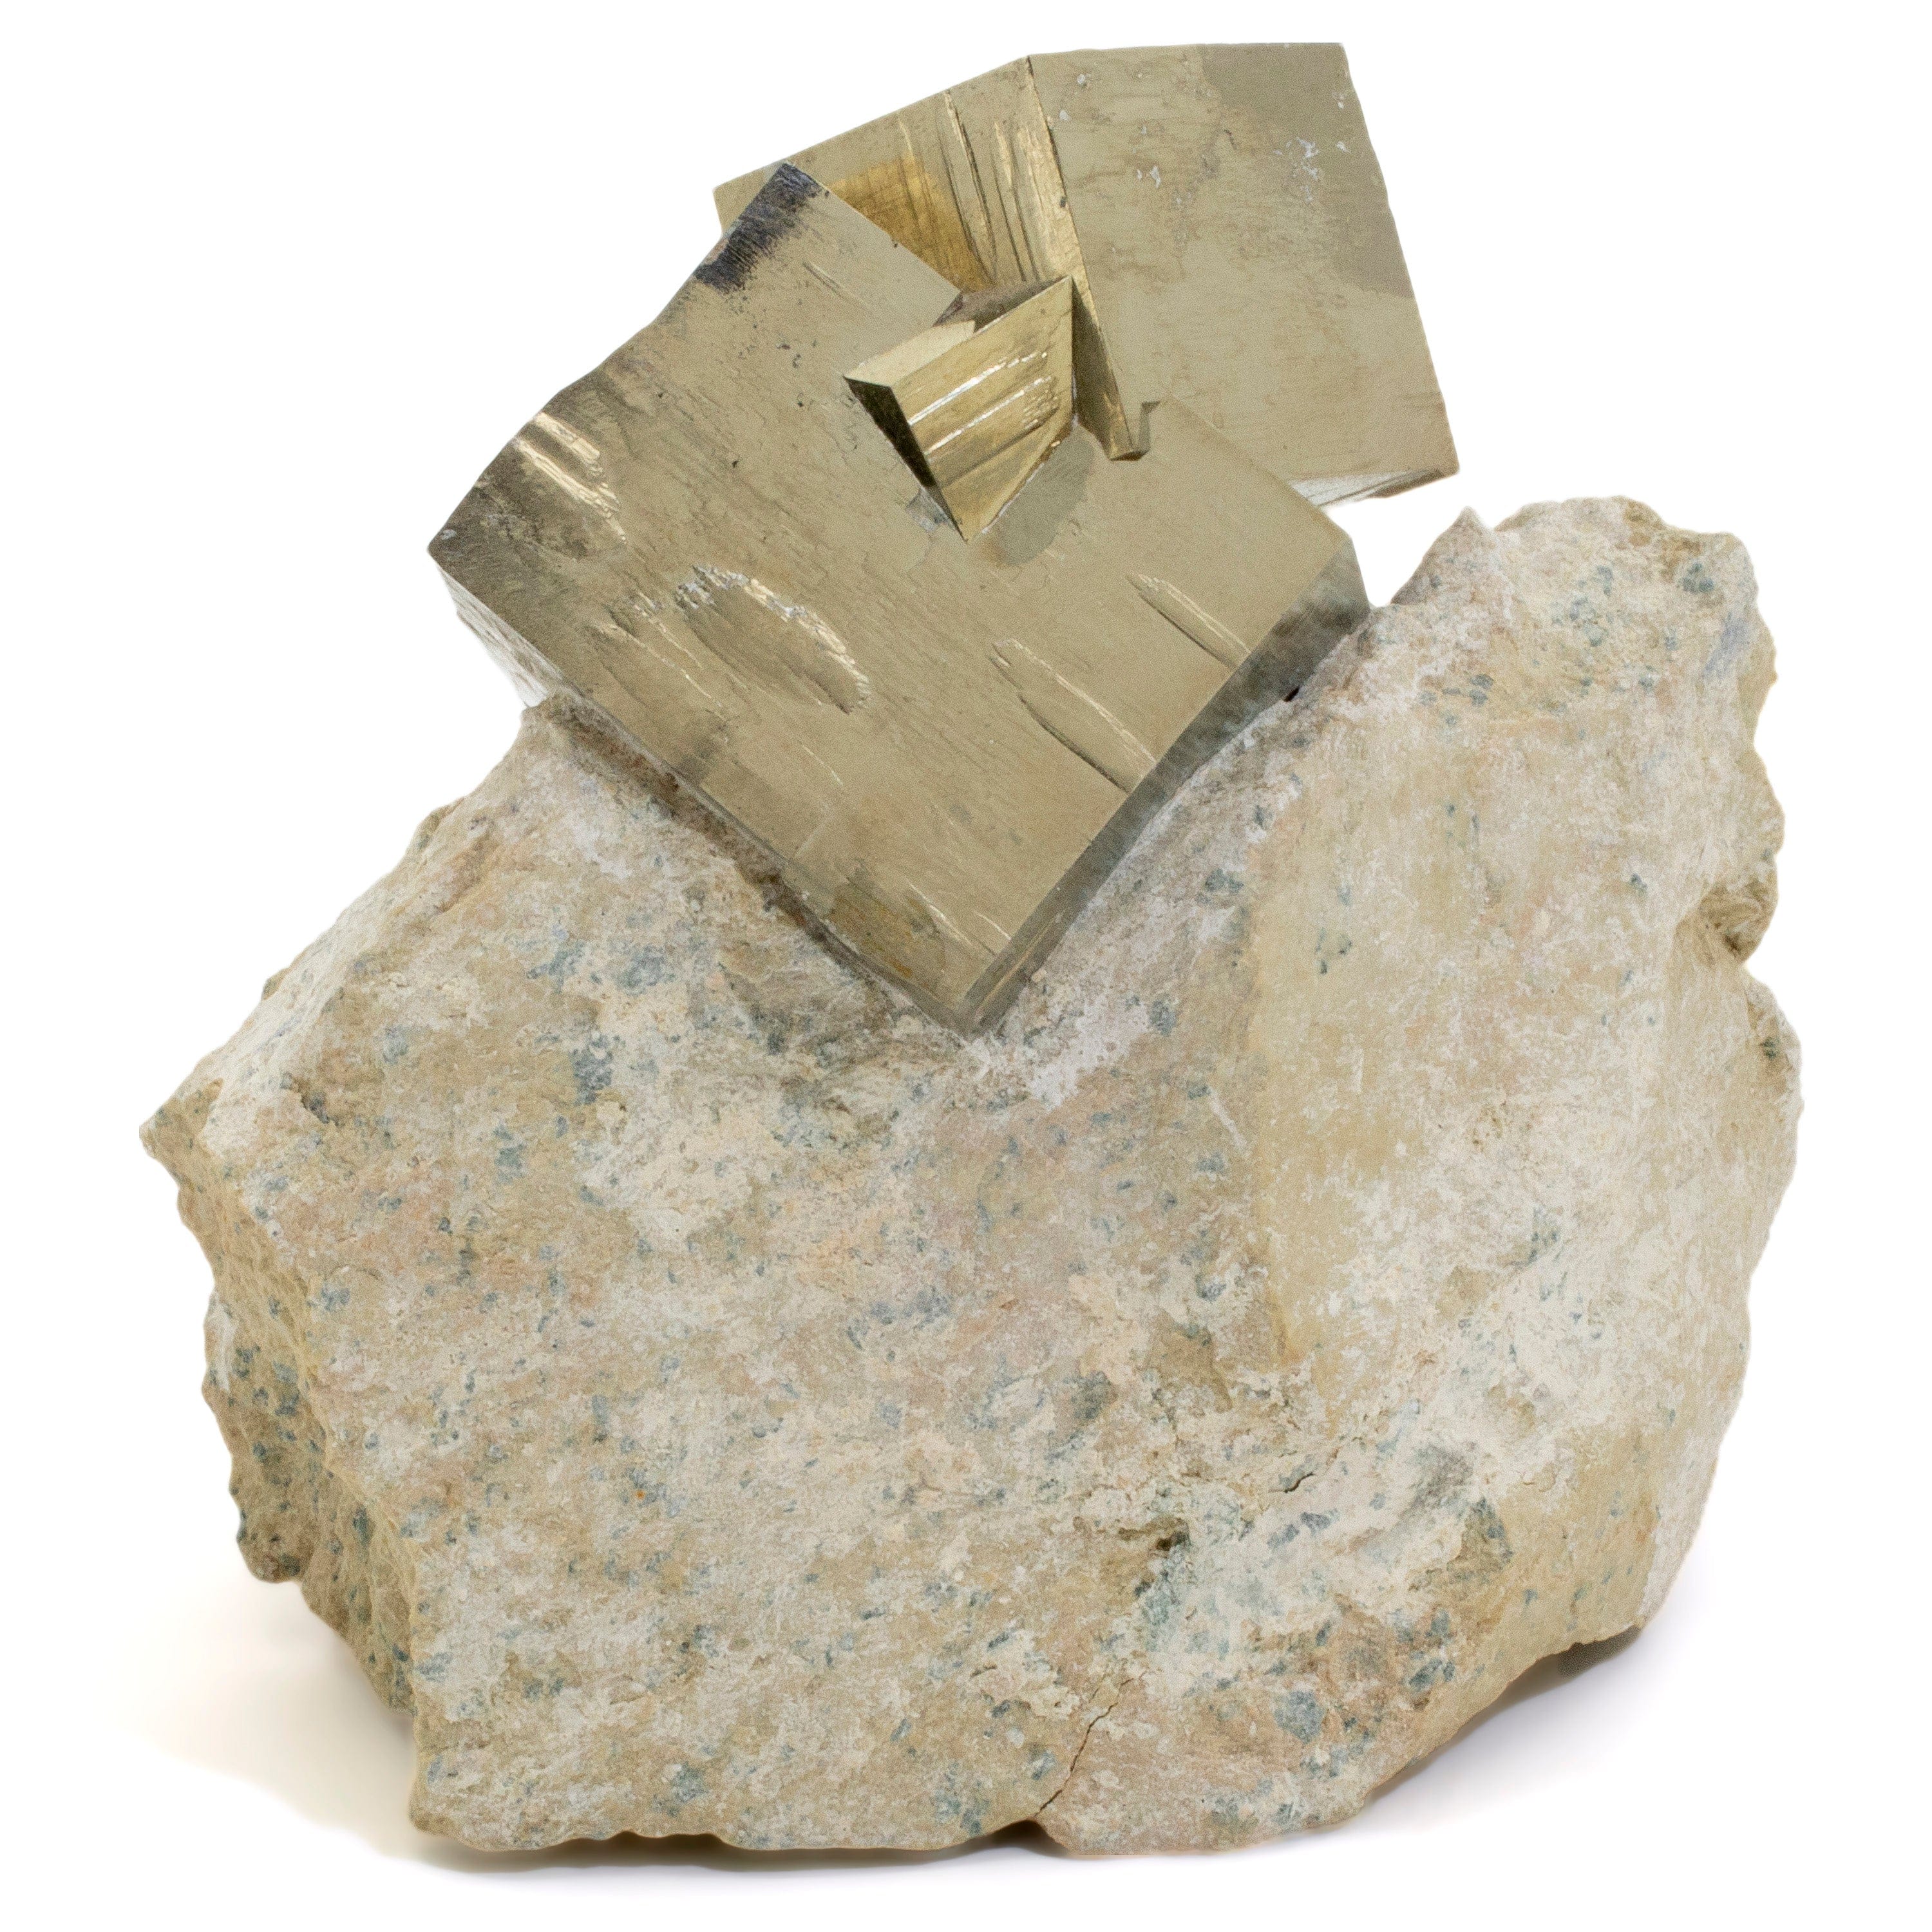 Kalifano Pyrite Natural Pyrite Cube Cluster in Matrix from Spain - 4.5" / 1,025g SPC3600.002